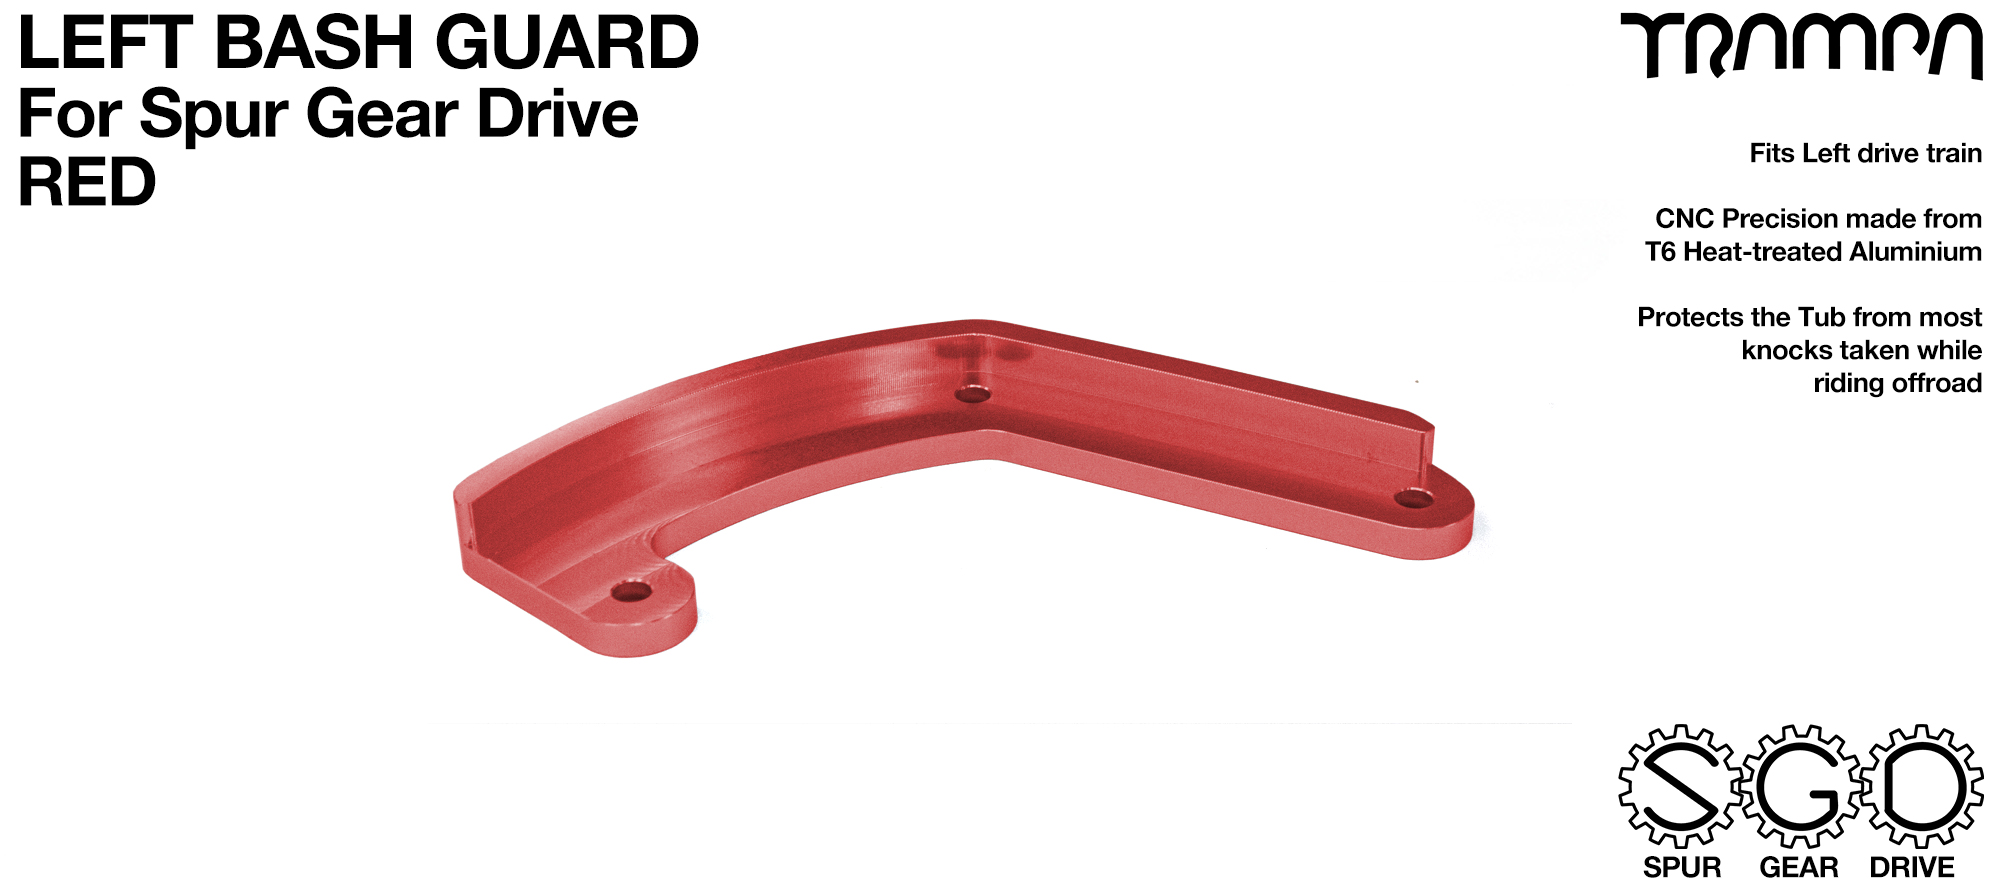 MkII Spur Gear Drive Bash Guard - LEFT Side - RED